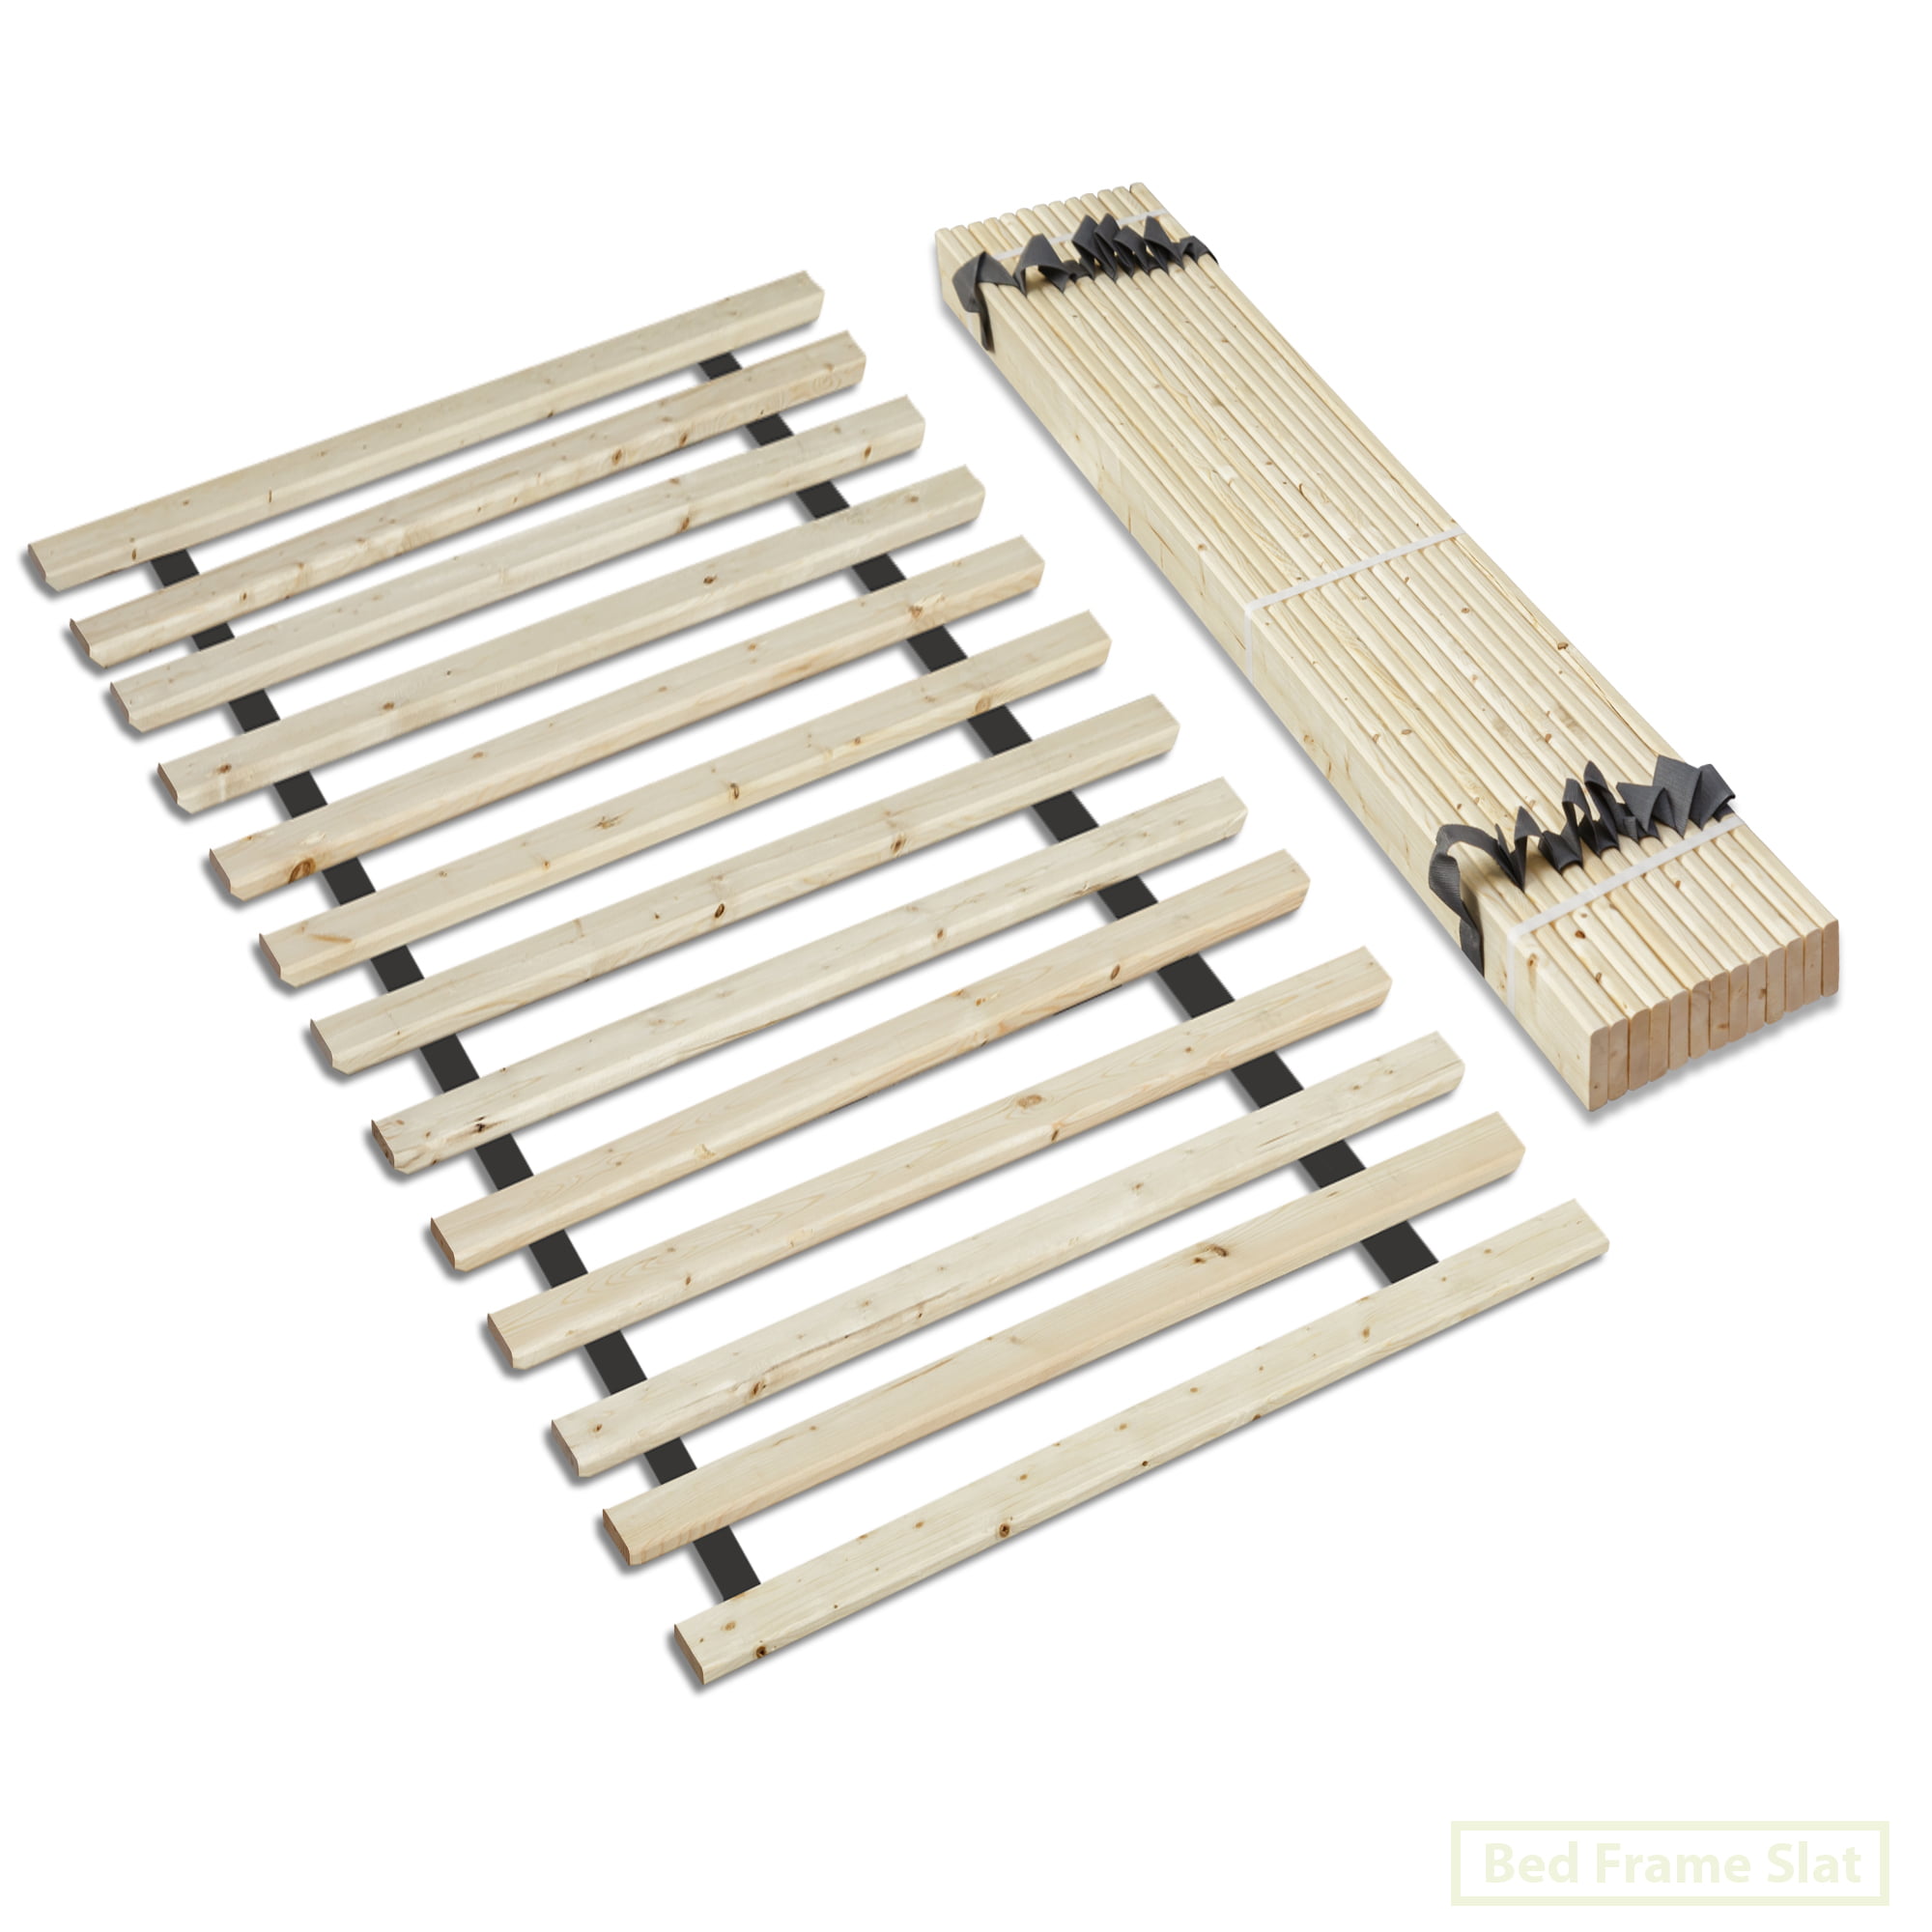 0.75-Inch Standard Mattress Support Wooden Bunkie Board/Slats with Covered Mayton Queen Beige